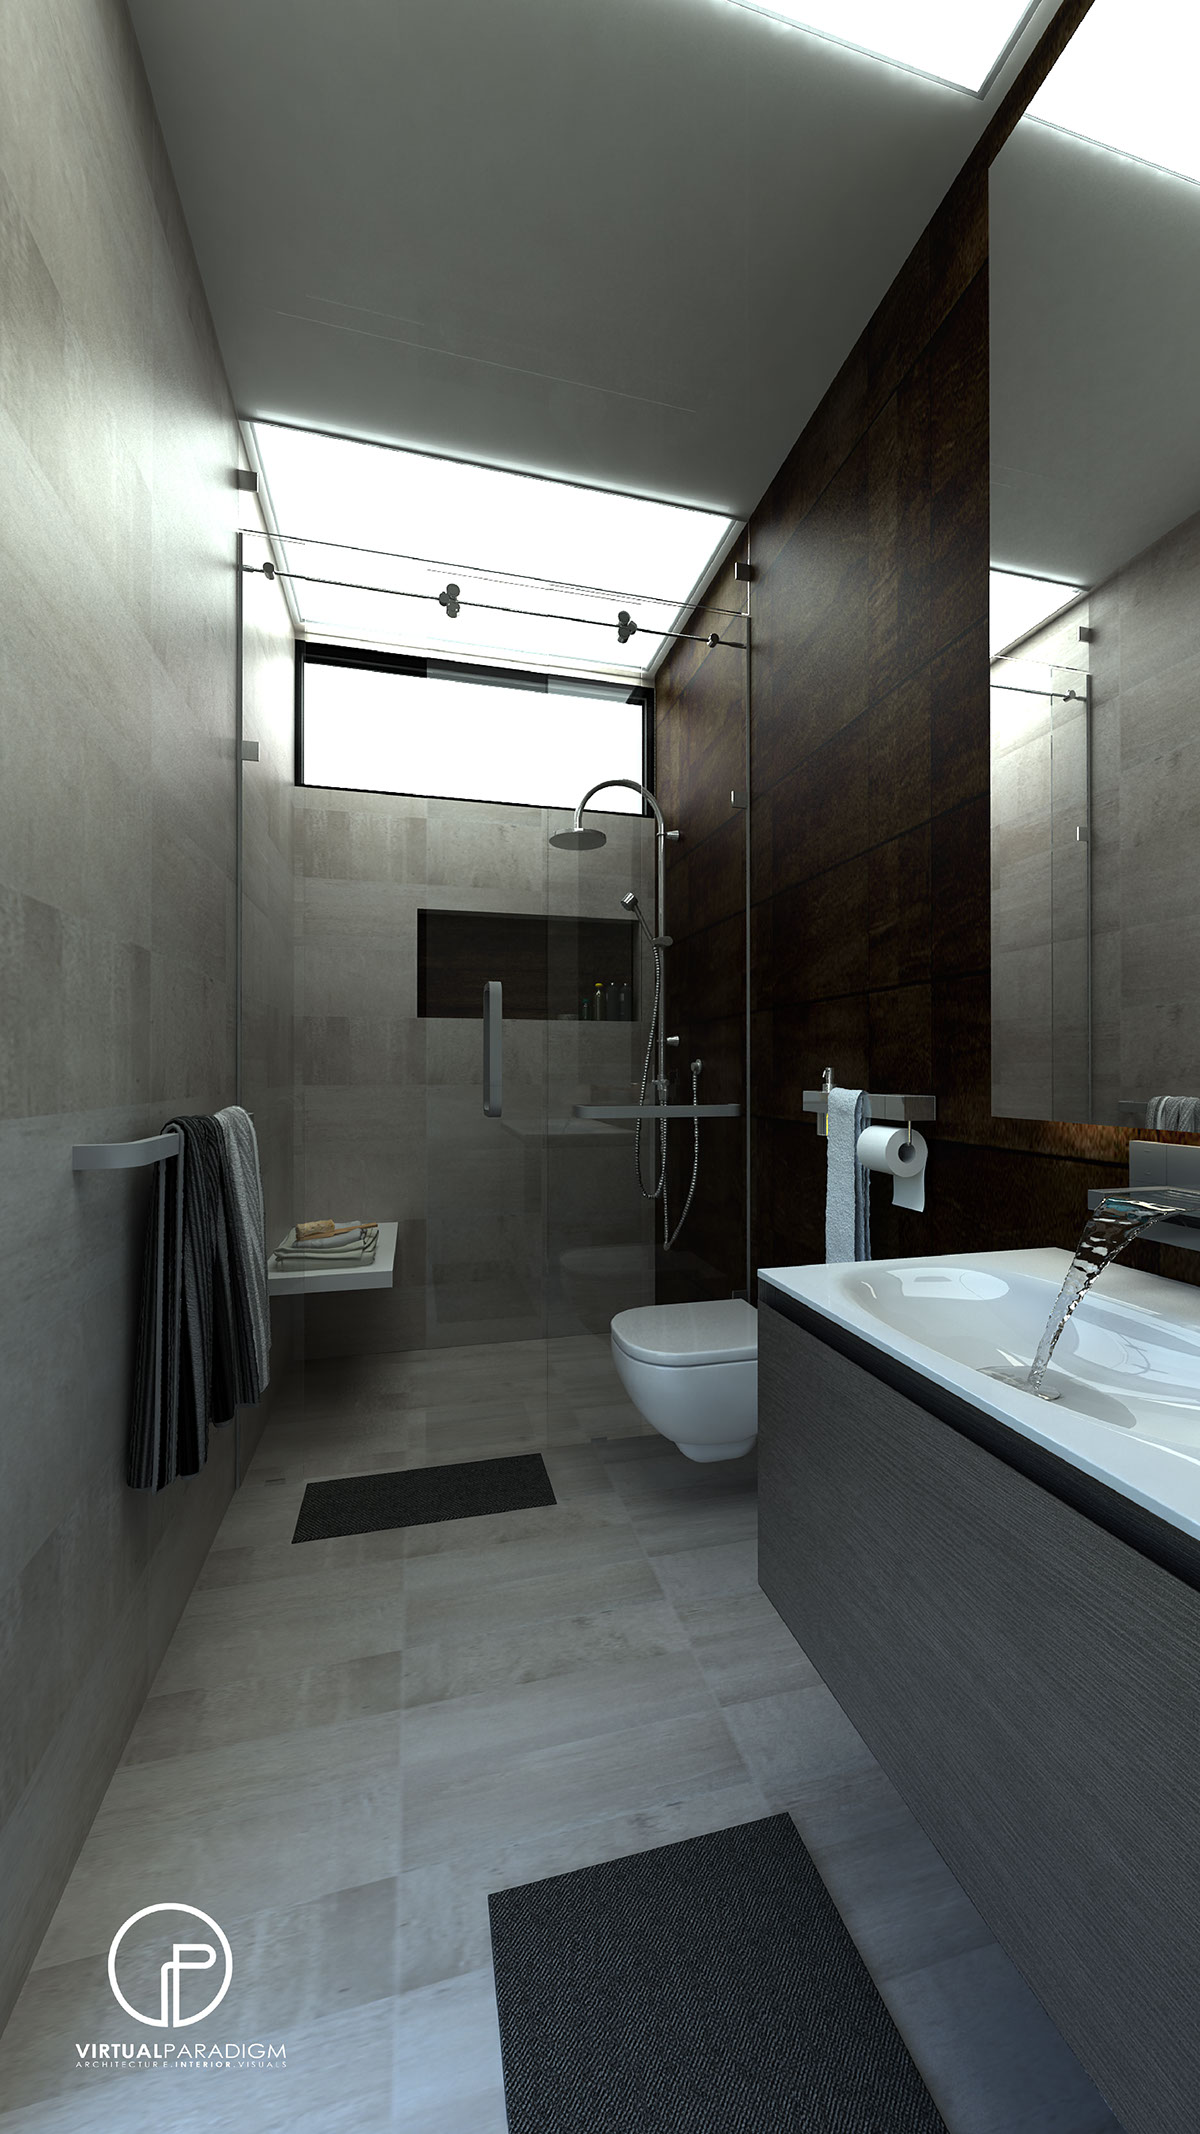 3ds max vray photoshop #Ps25Under25